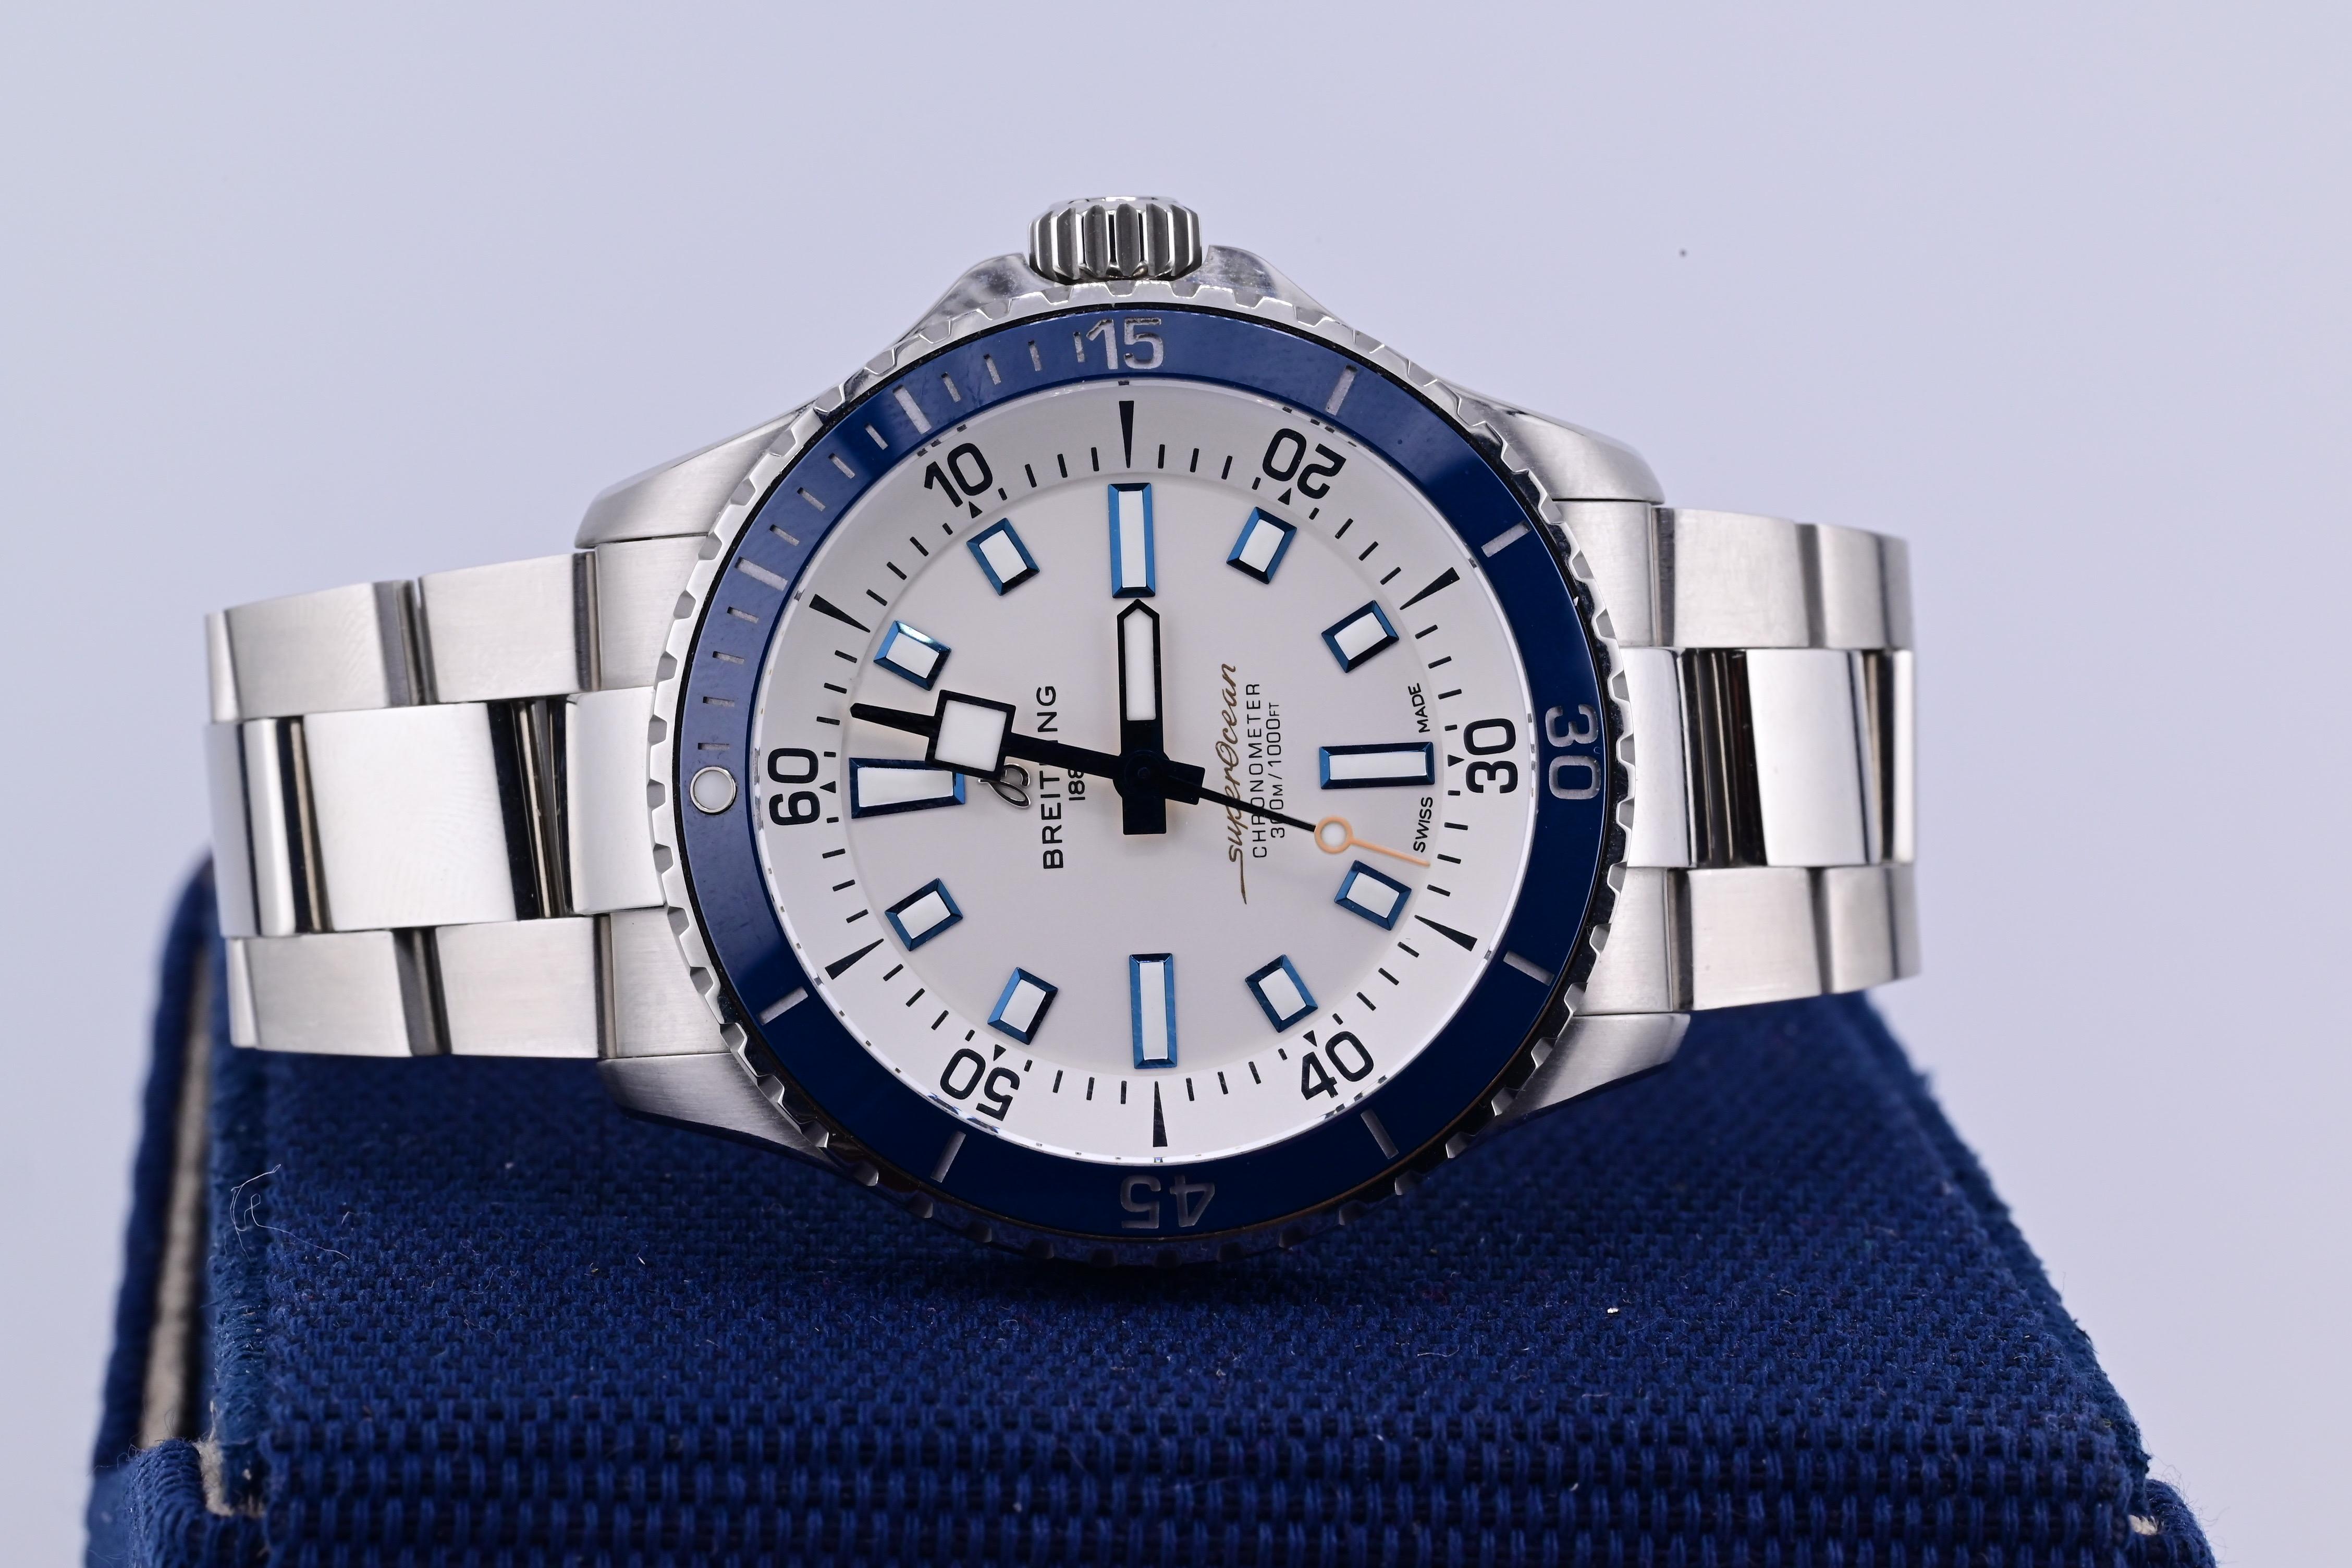 
Up for sale is a stunning Breitling Superocean in a beautiful dial. This timepiece is made for men and comes with a bracelet made of stainless steel. It features a unidirectional rotating bezel and a solid caseback. The watch is water-resistant up